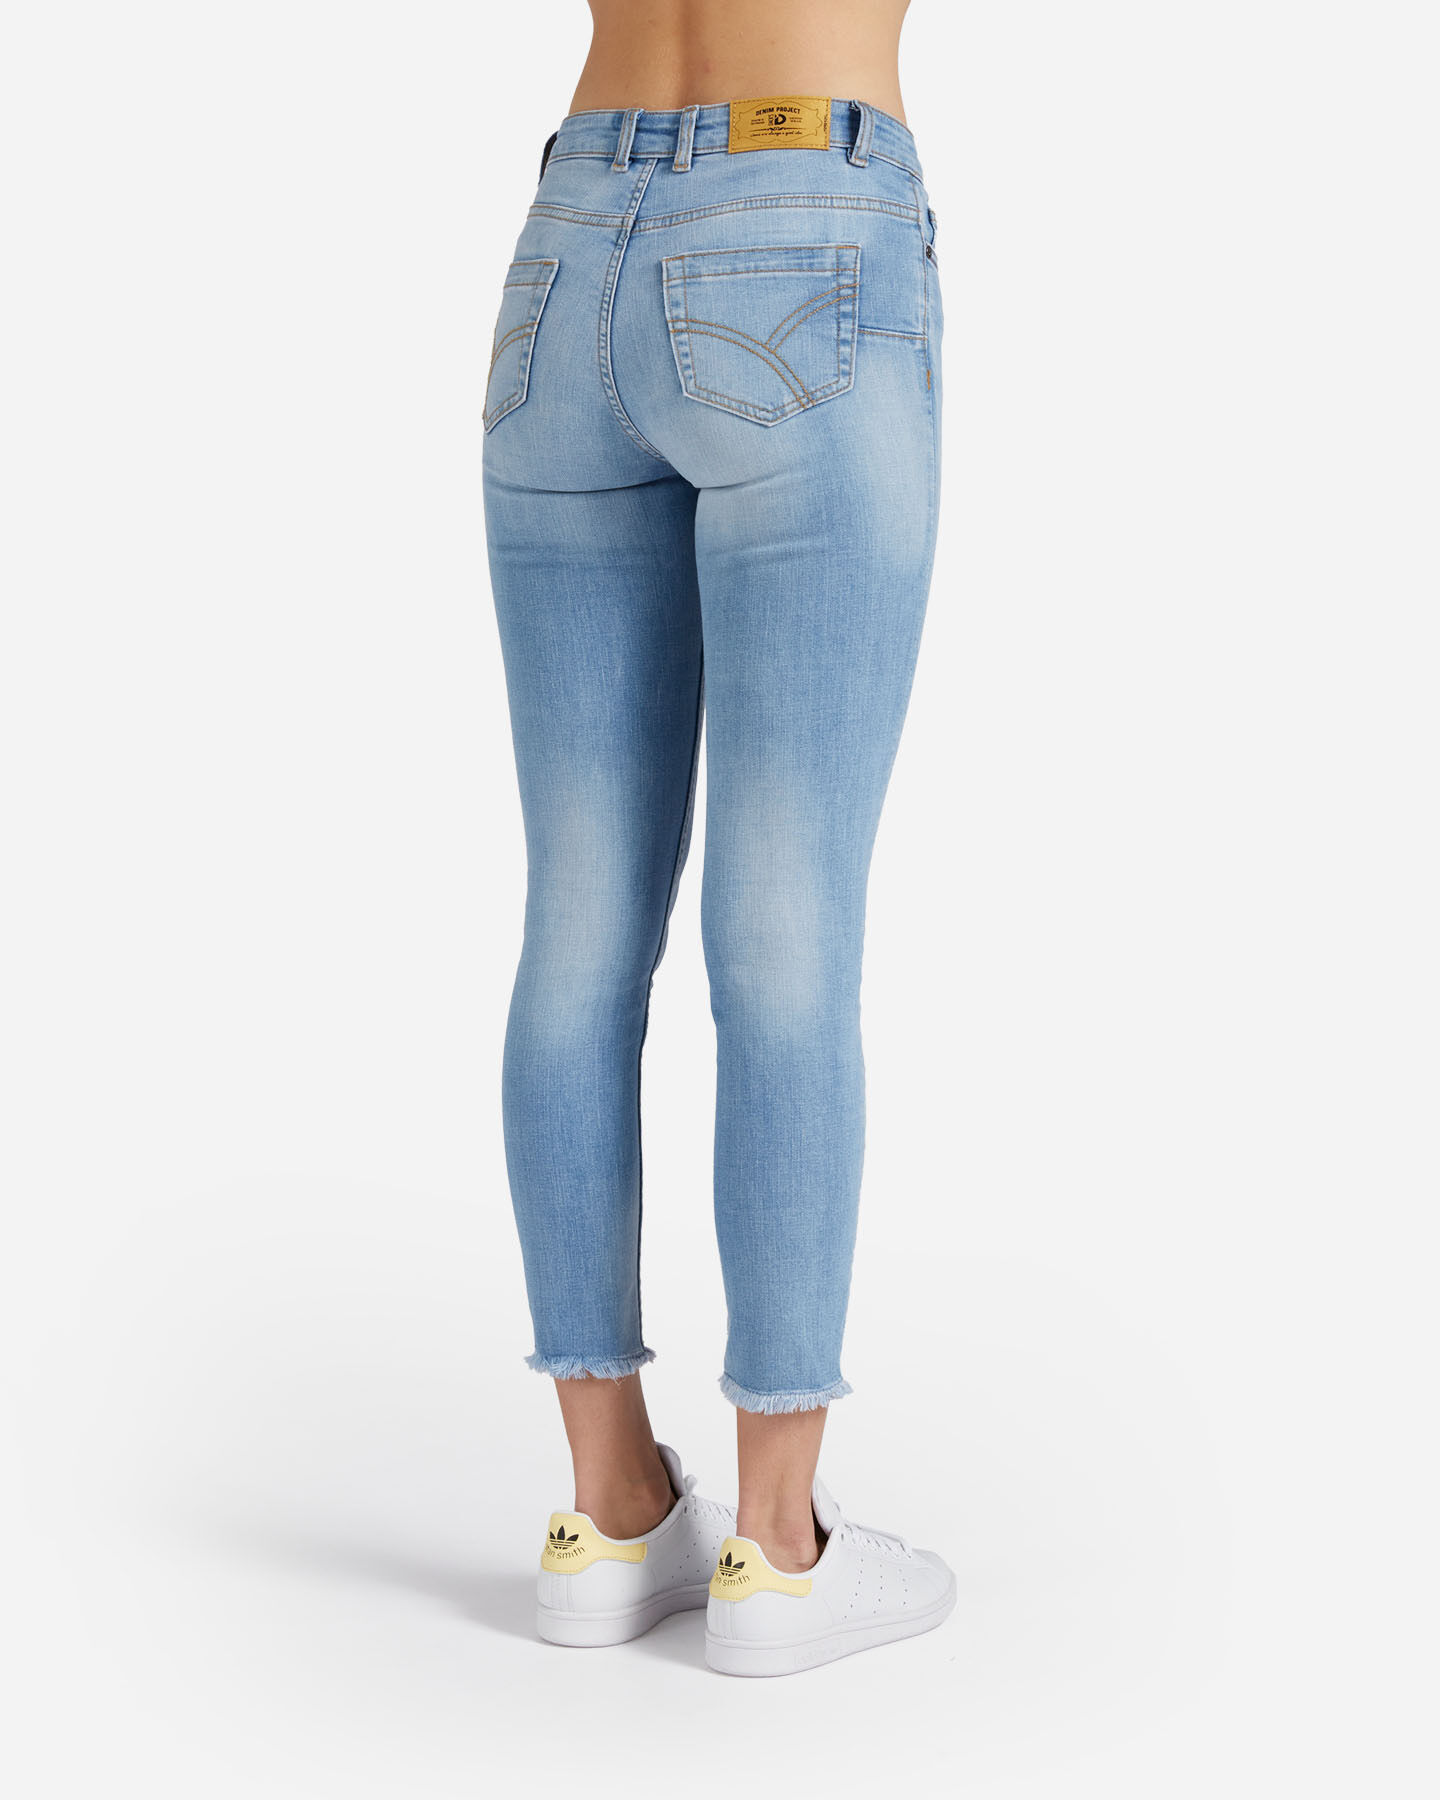  Jeans DACK'S ESSENTIAL W S4129824|LD|40 scatto 1